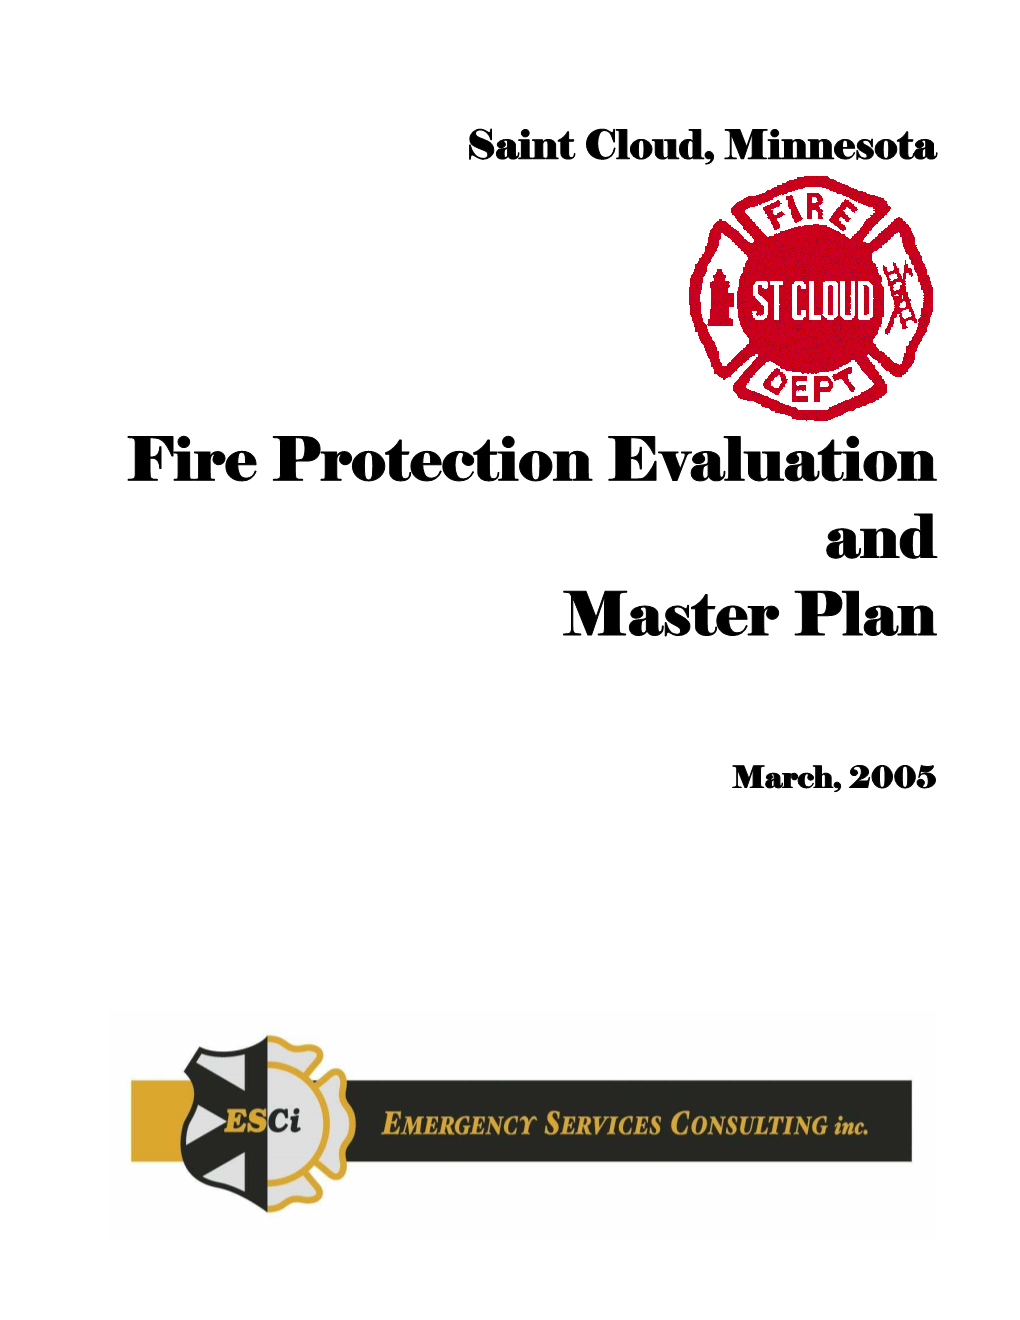 St. Cloud Fire Protection Evaluation and Master Plan (2005)